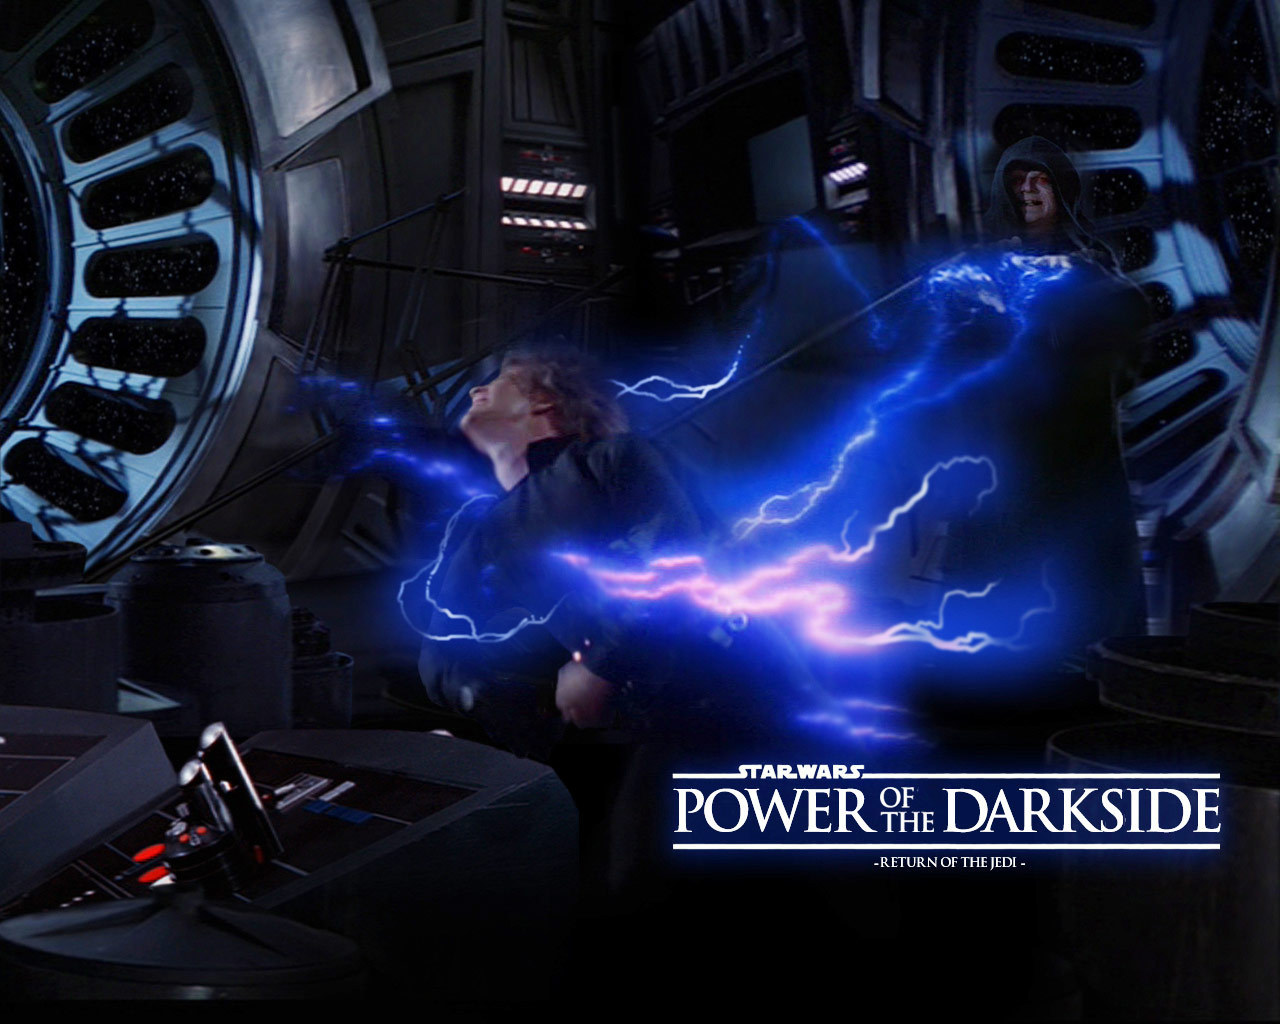 star wars dark side wallpaper,action adventure game,pc game,fictional character,technology,screenshot